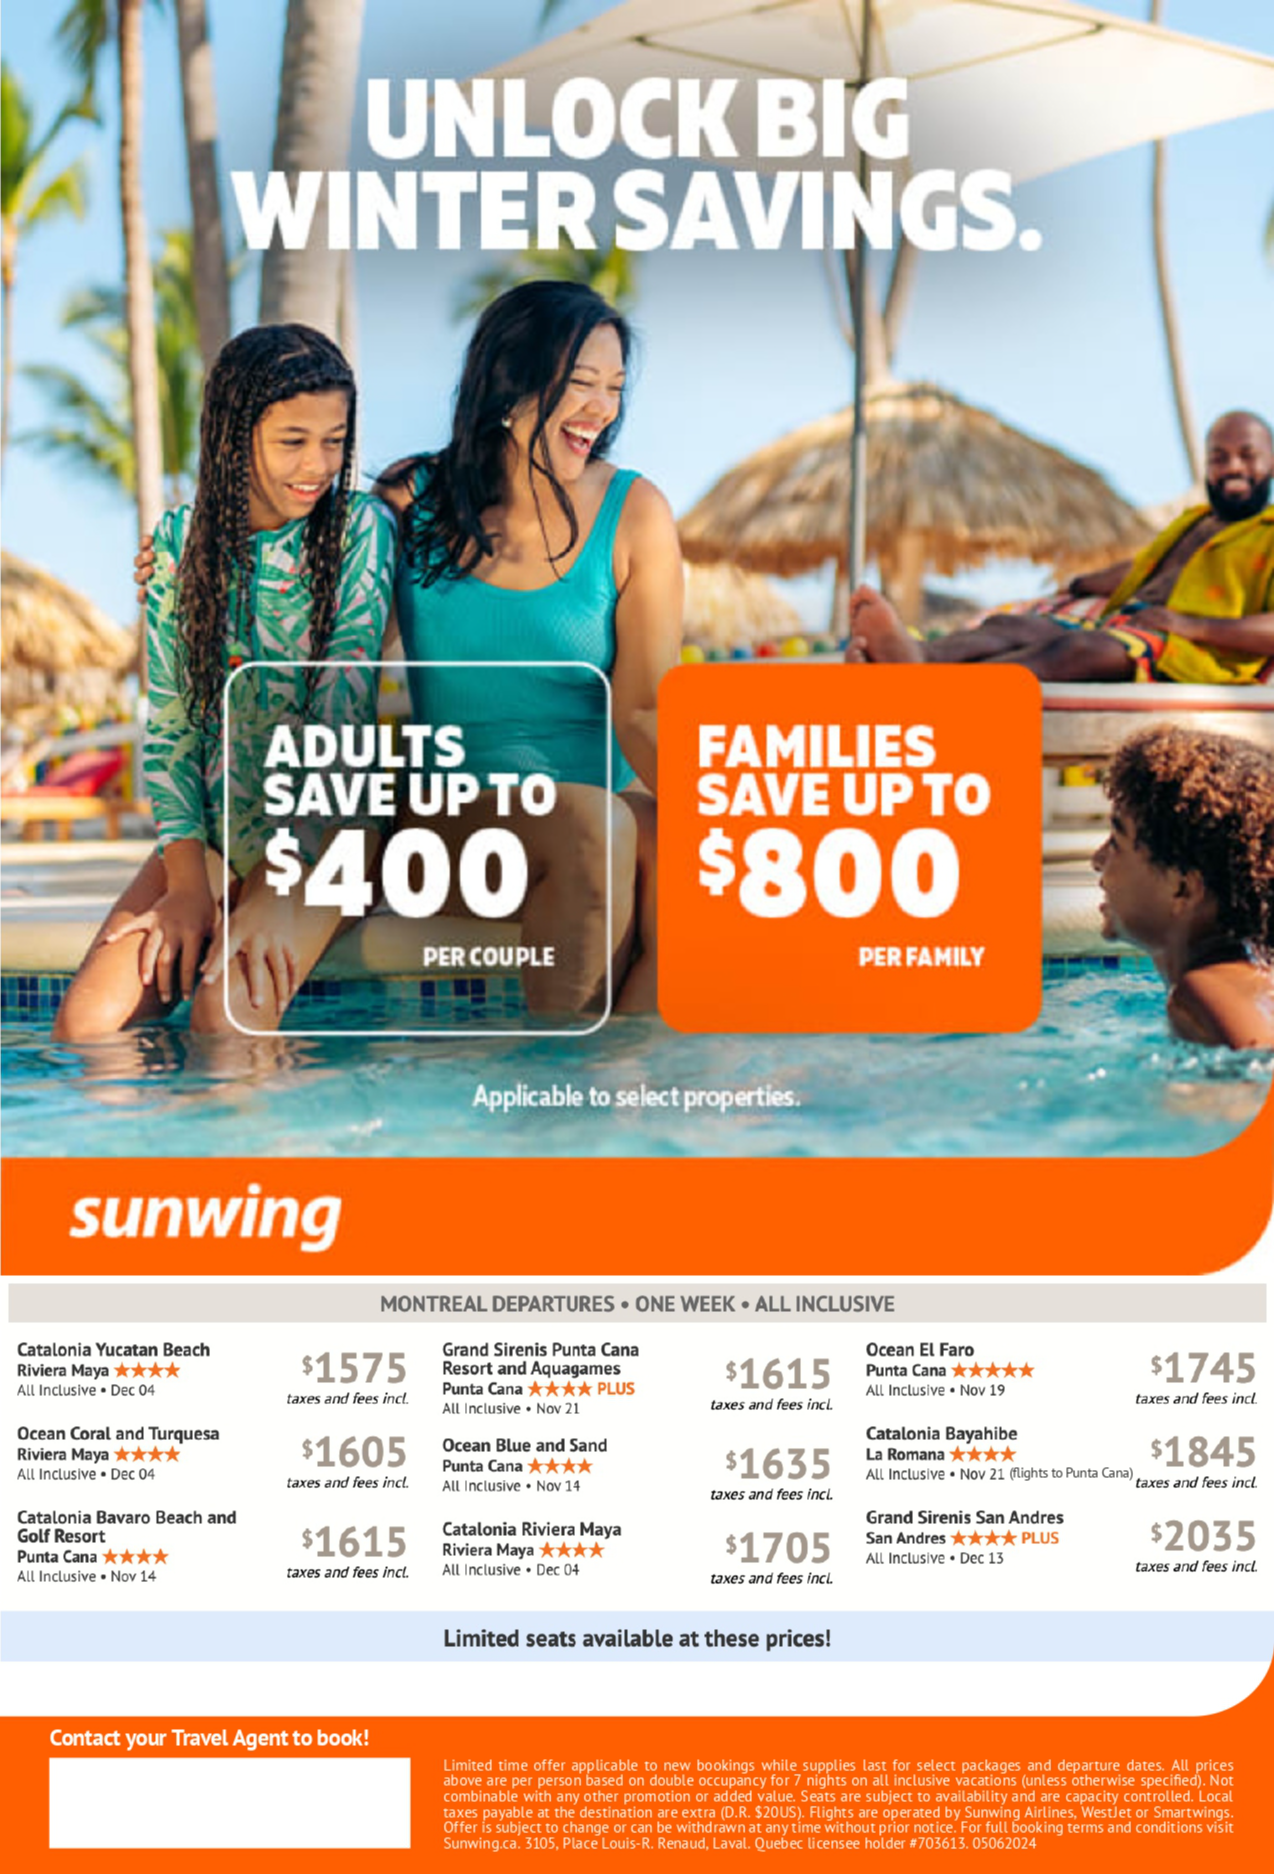 Sunwing Cancún Promotions Have More Fun with Aqua Terra Travel